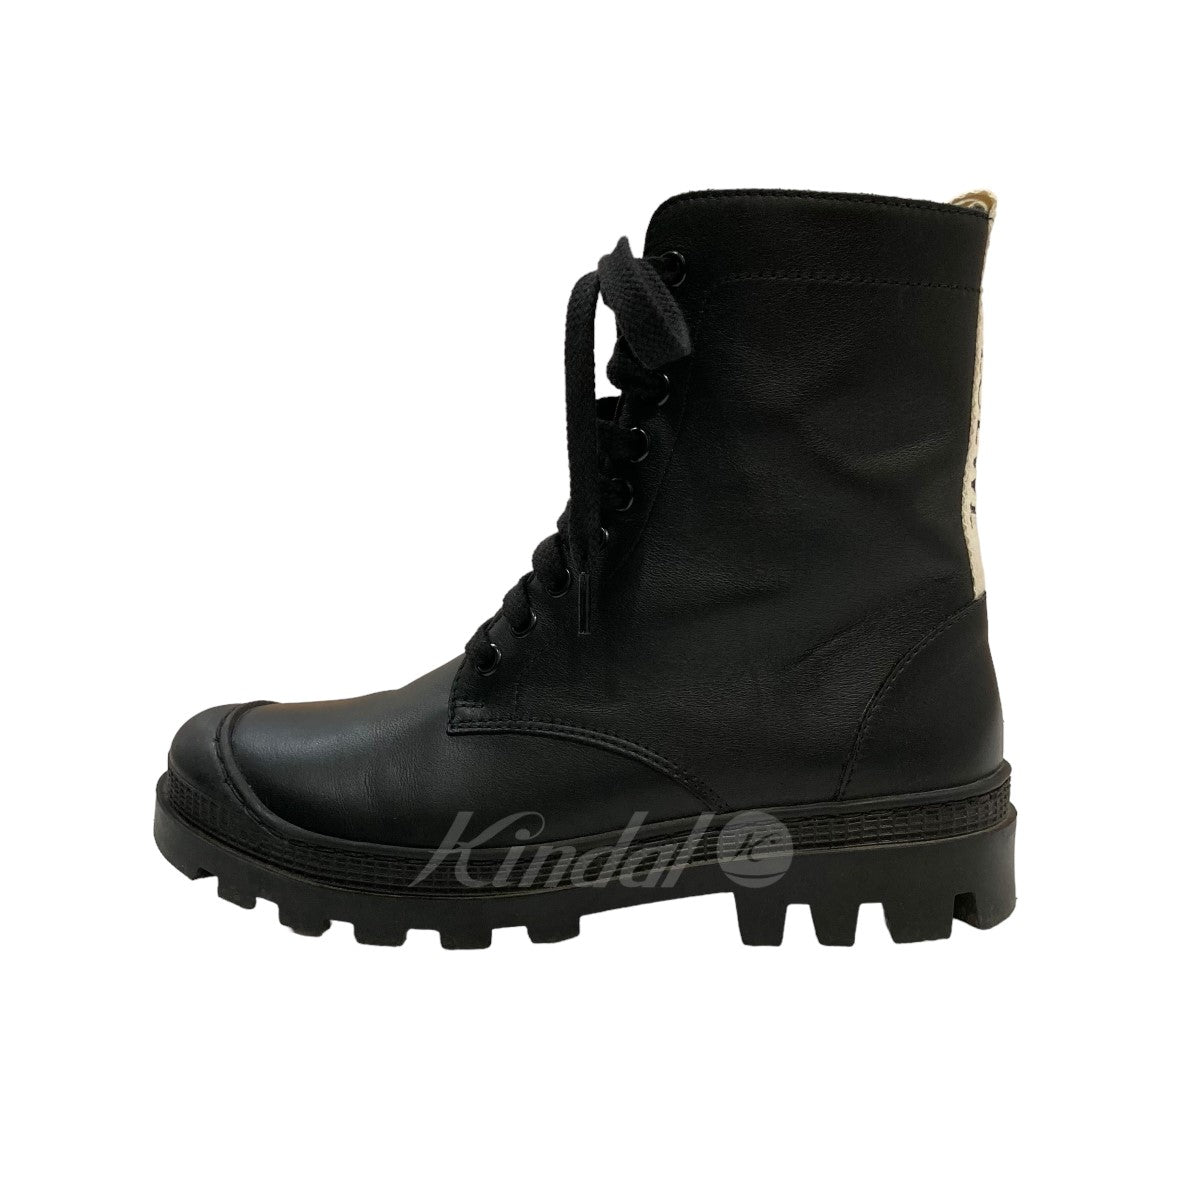 LOEWE(ロエベ) Lace Up Leather Boots レースアップレザーブーツ 